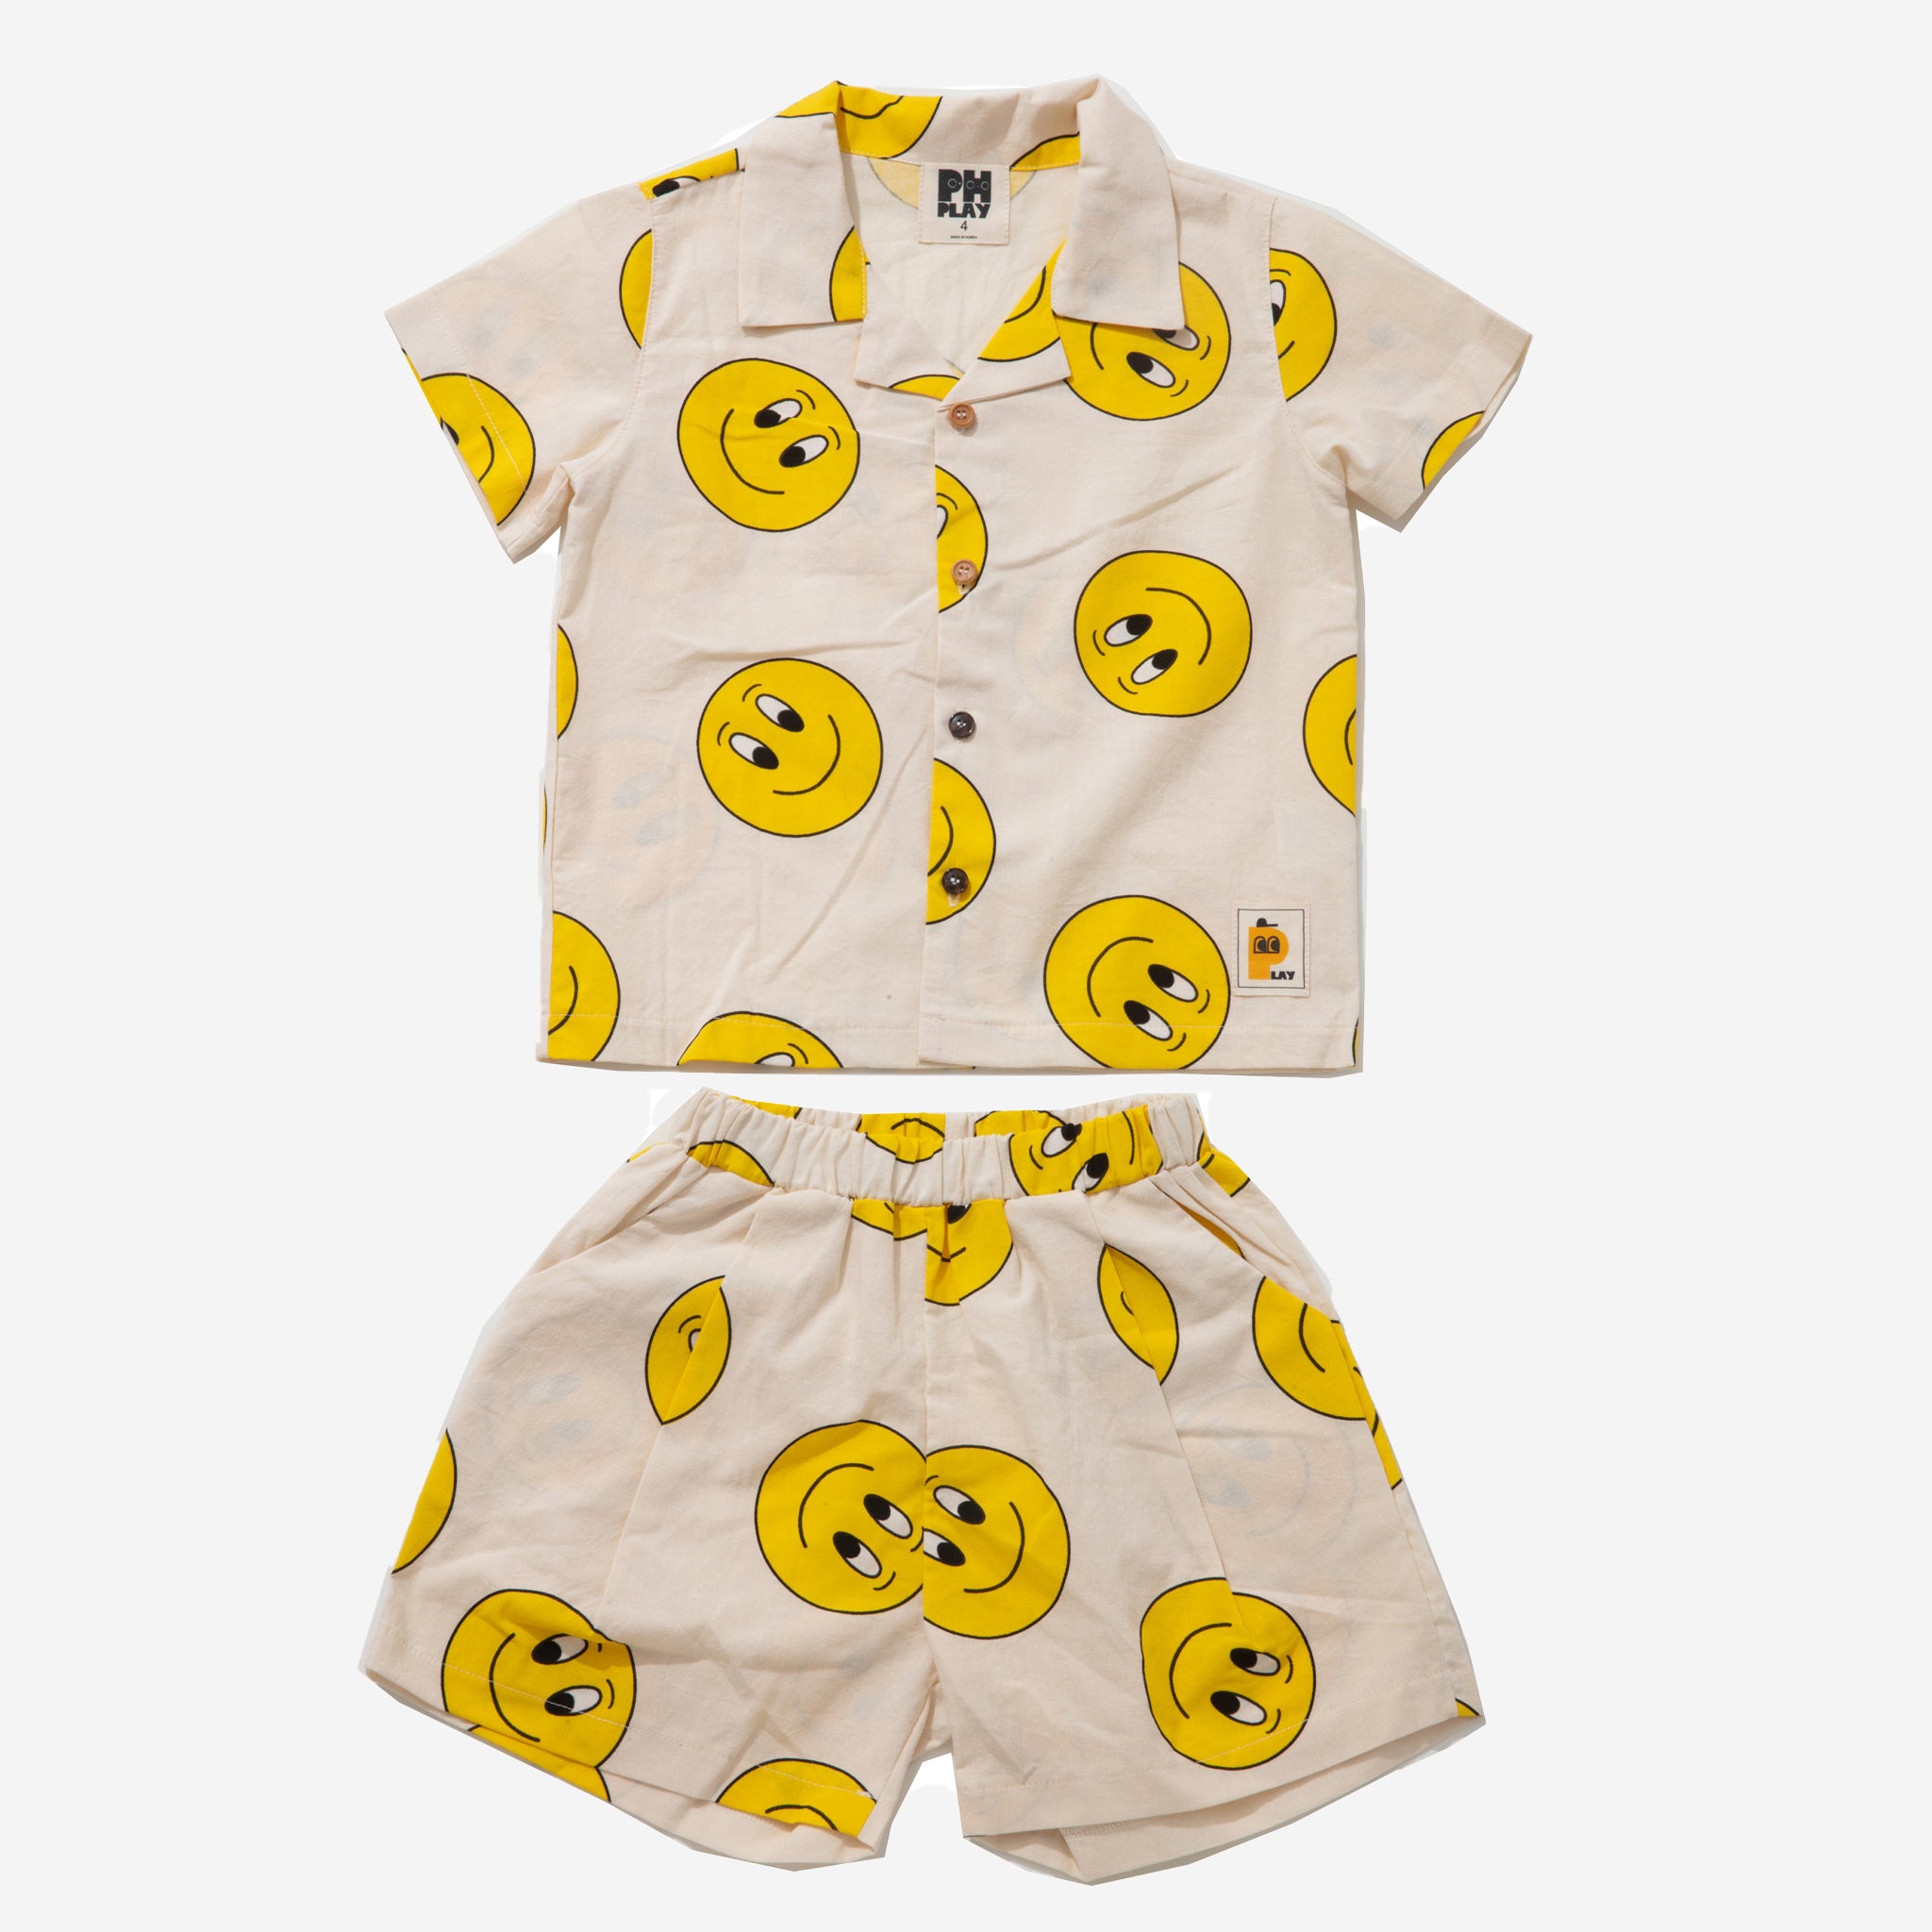 yellow smiley faces on cream background set includes short sleeves top with buttons on the front and a short 